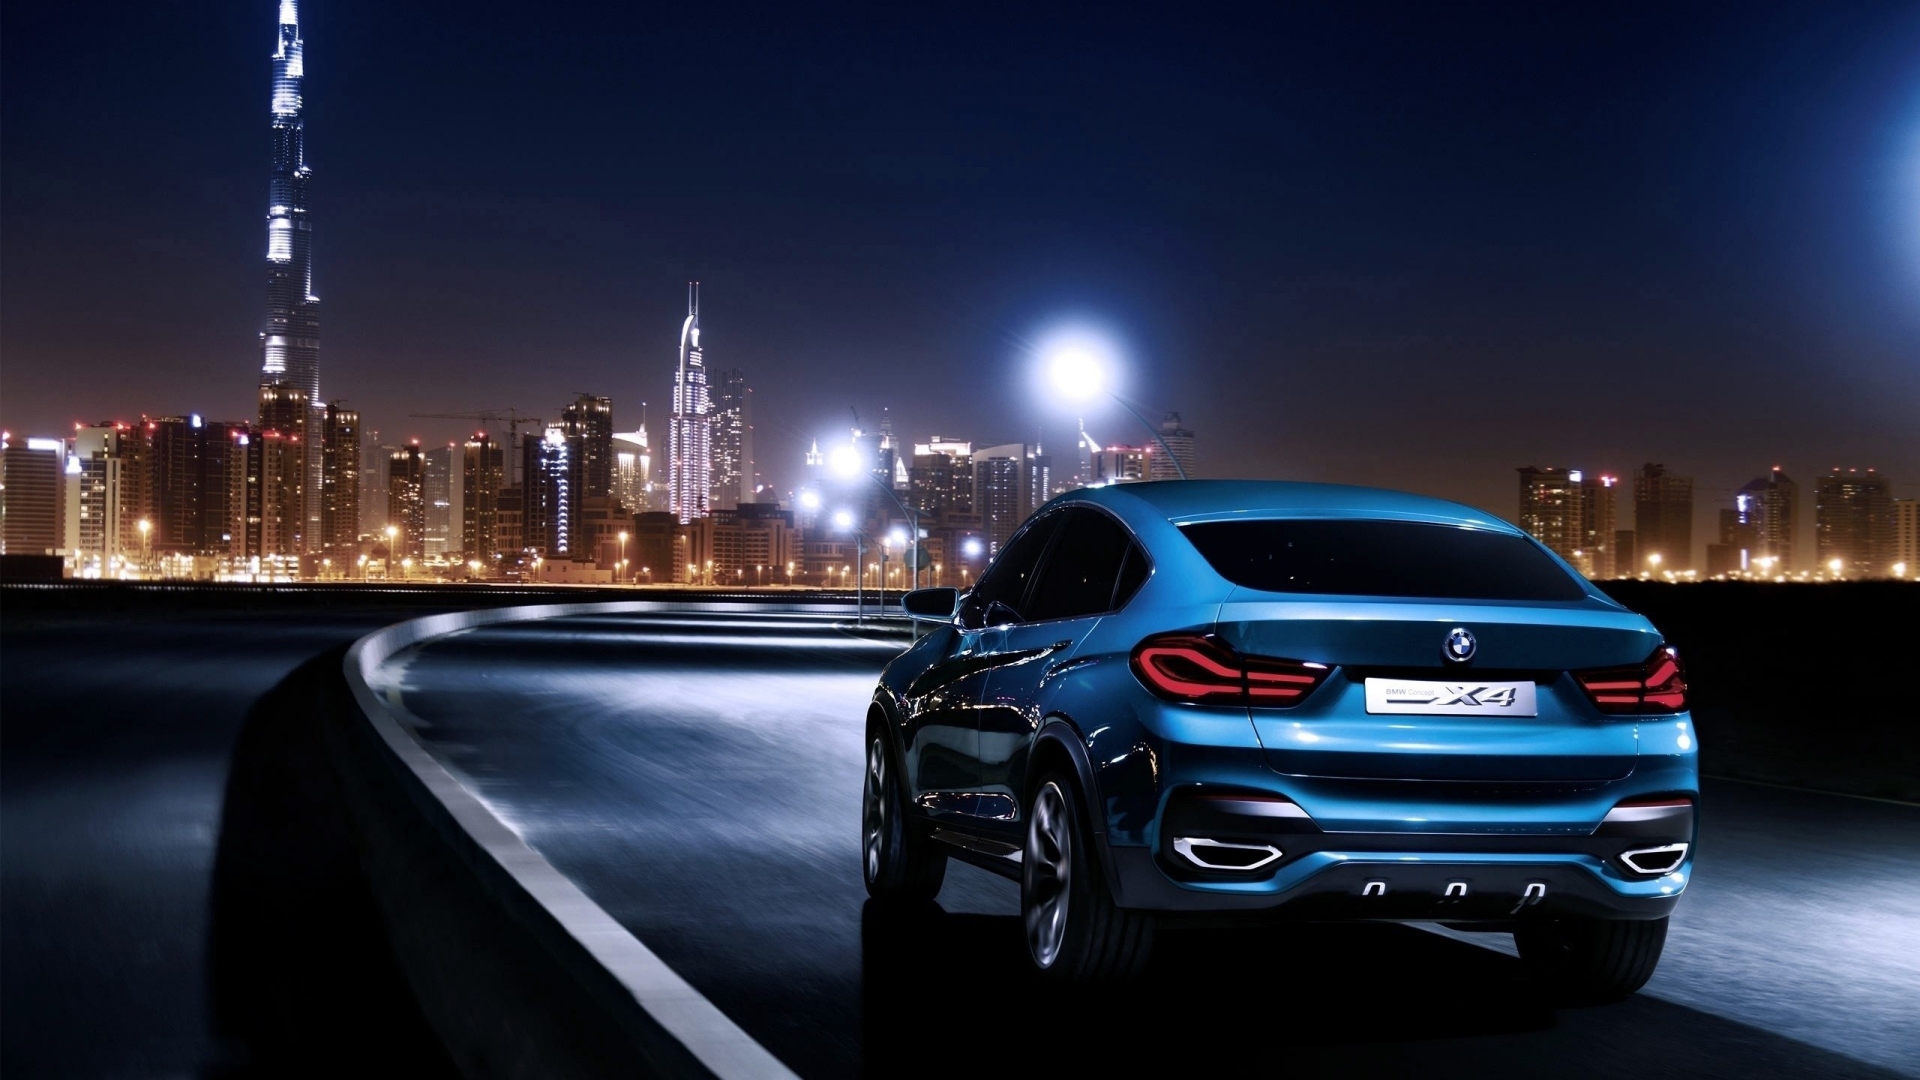 Blue BMW X4 Rear for 1920 x 1080 HDTV 1080p resolution